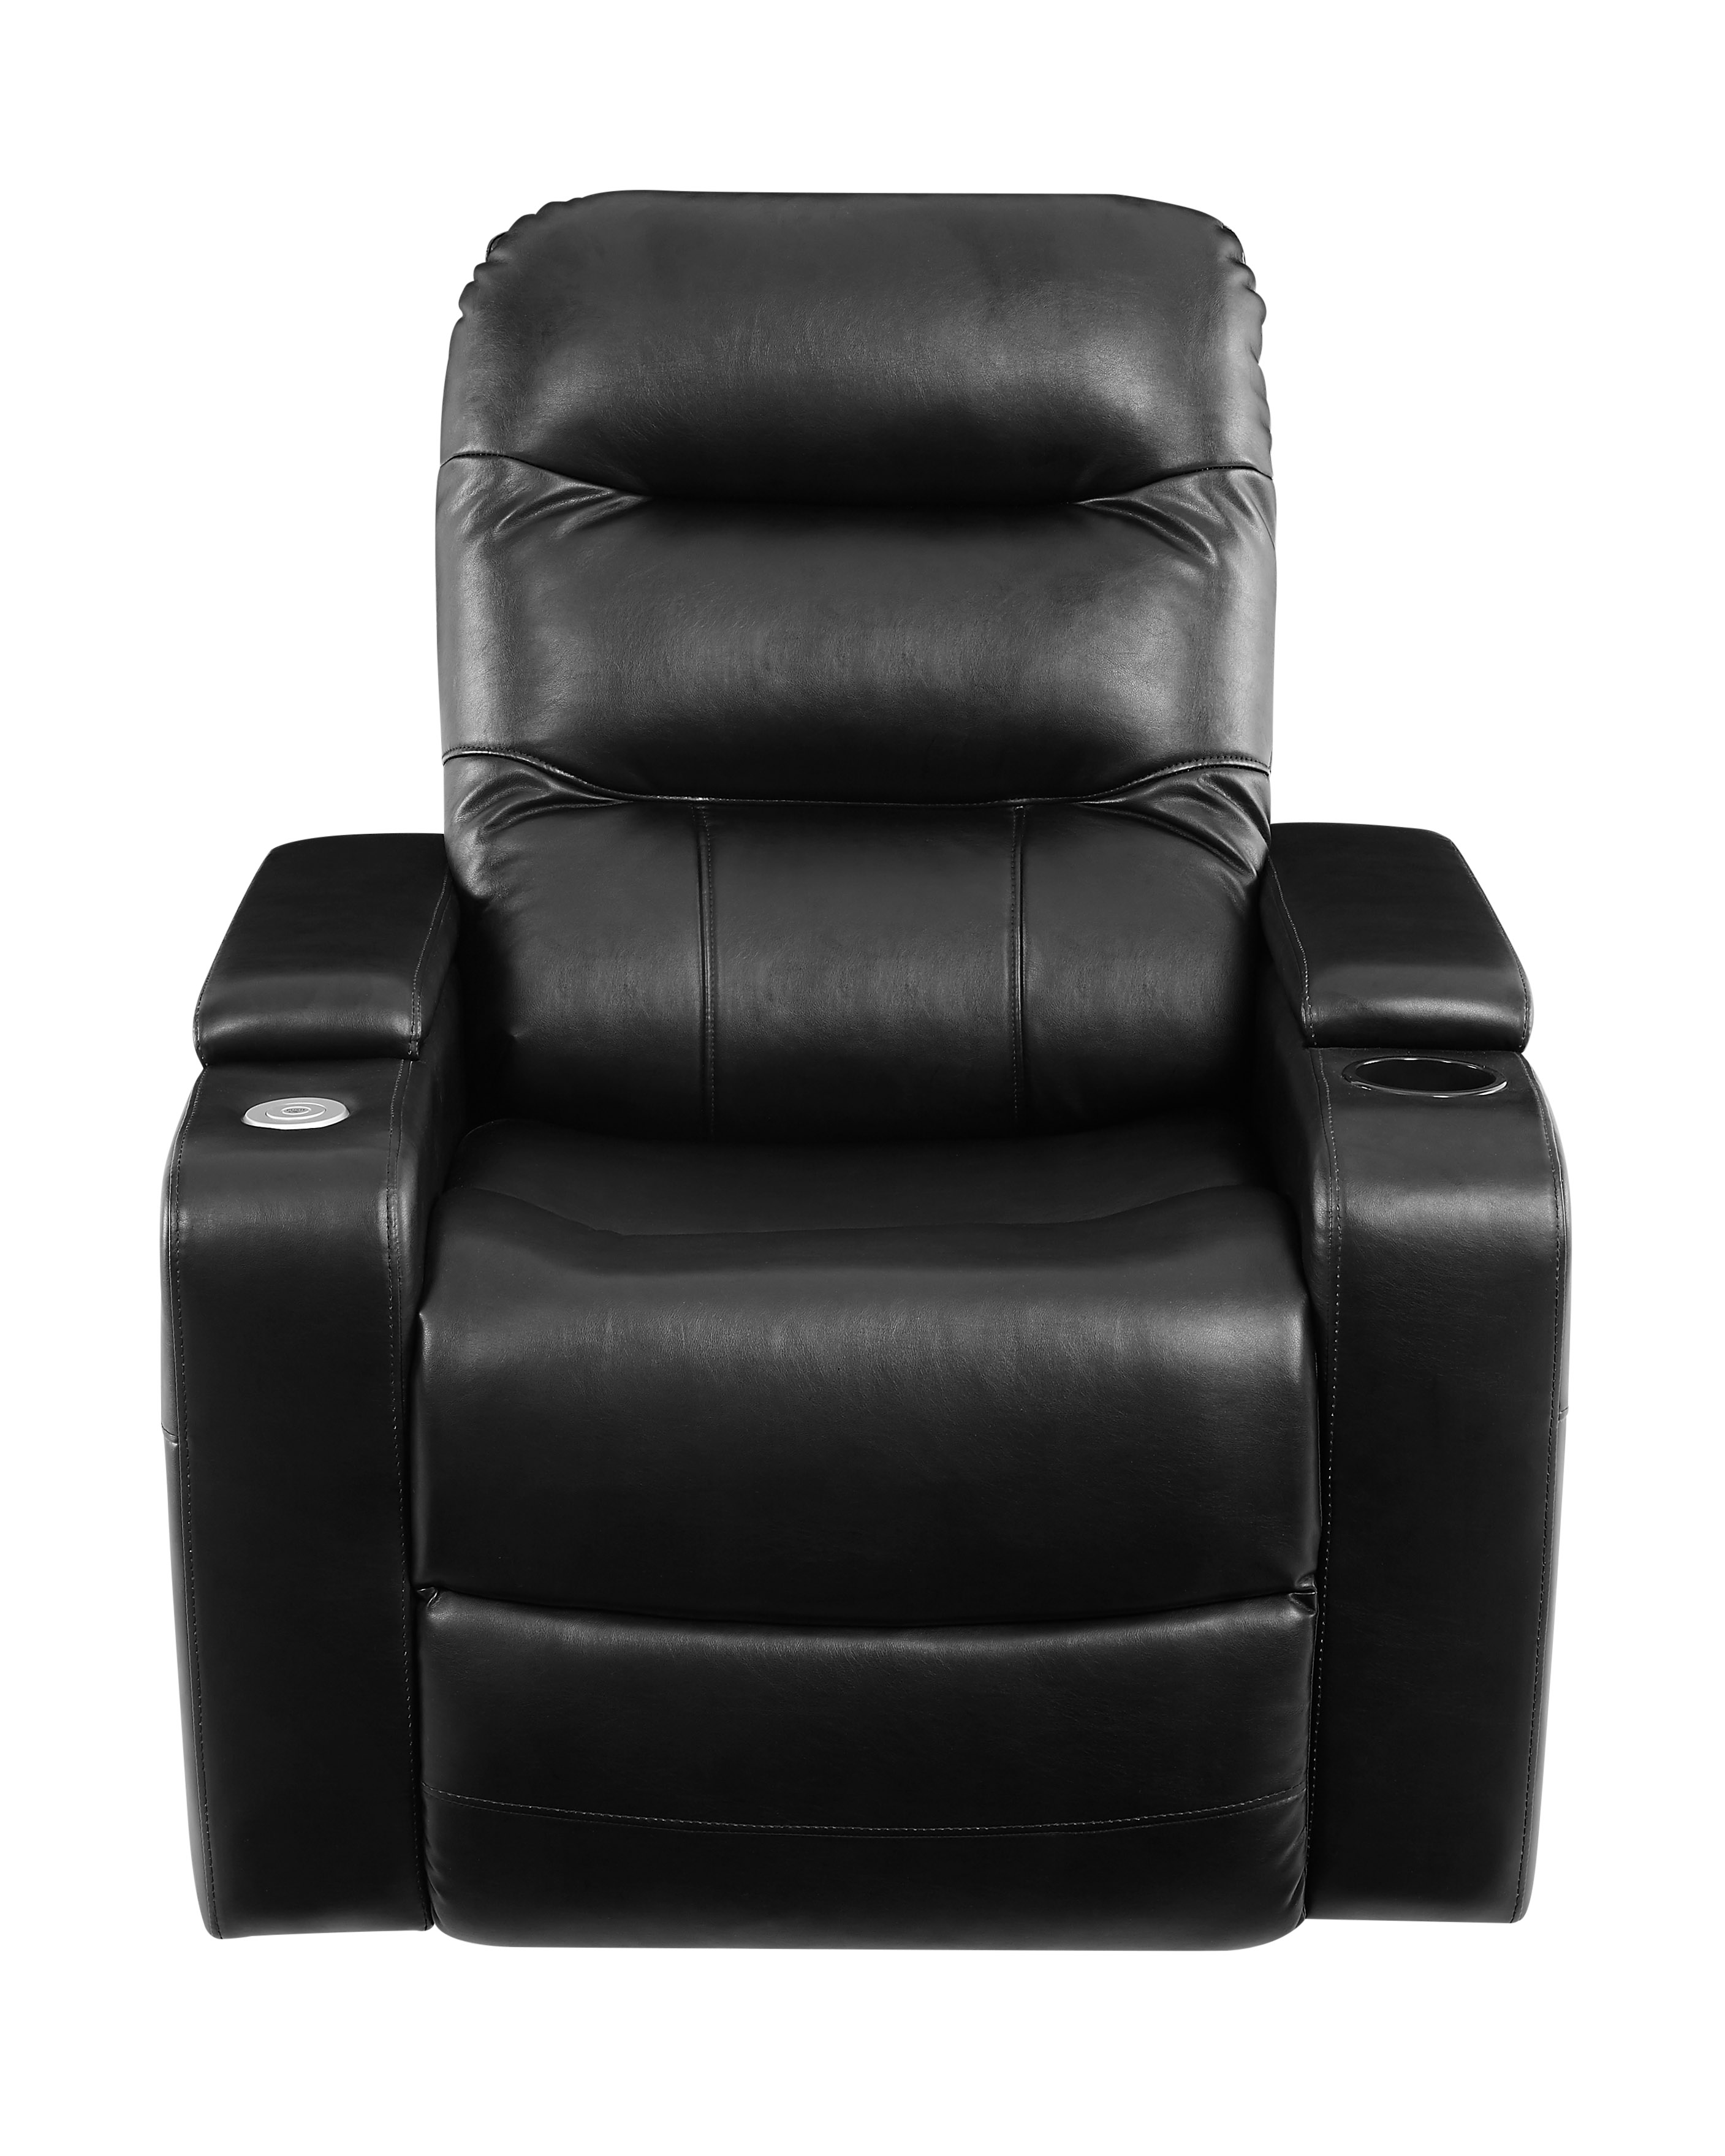 Relax-a-Lounger Lilac Manual Standard Recliner, Black Fabric - image 4 of 16